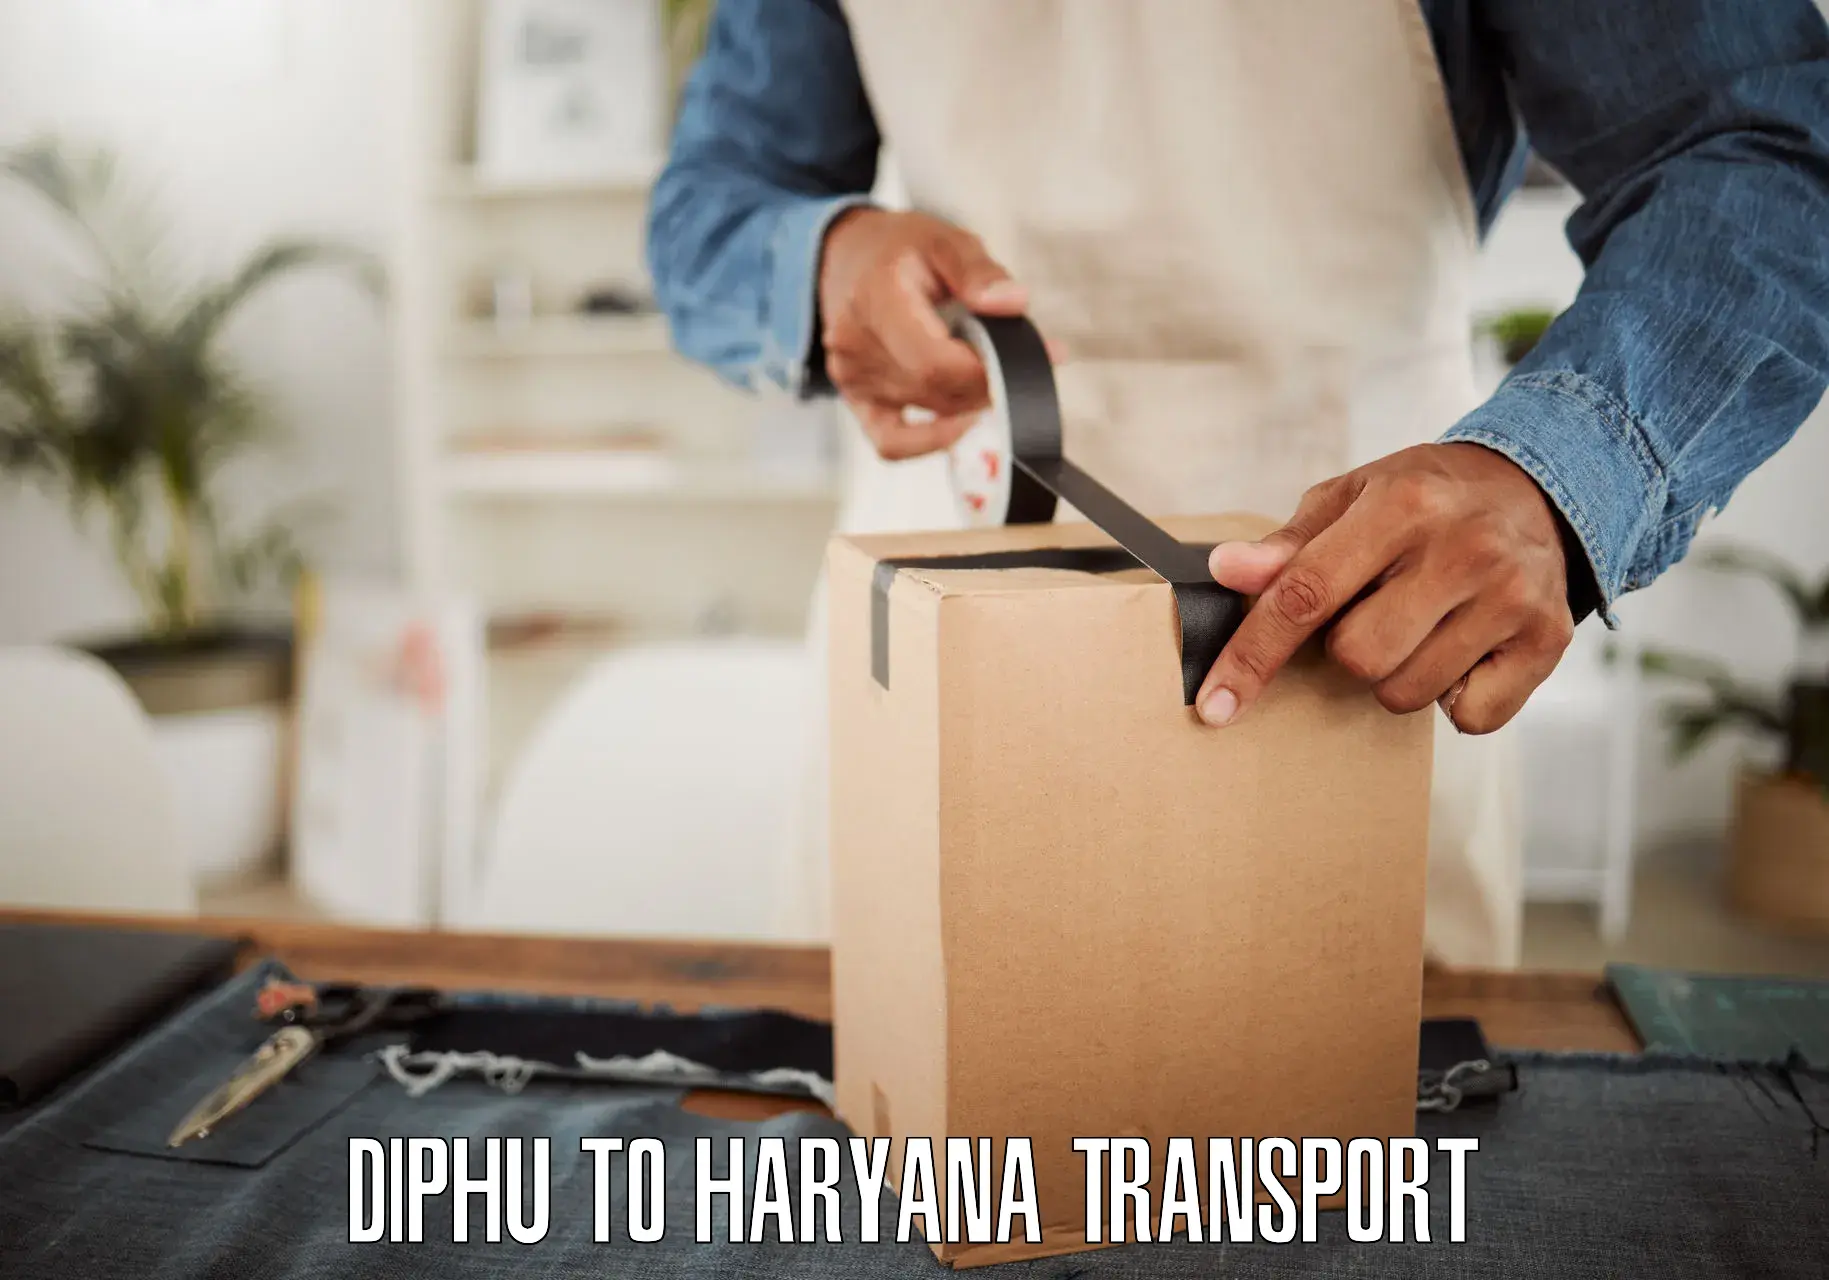 Cargo train transport services Diphu to Haryana